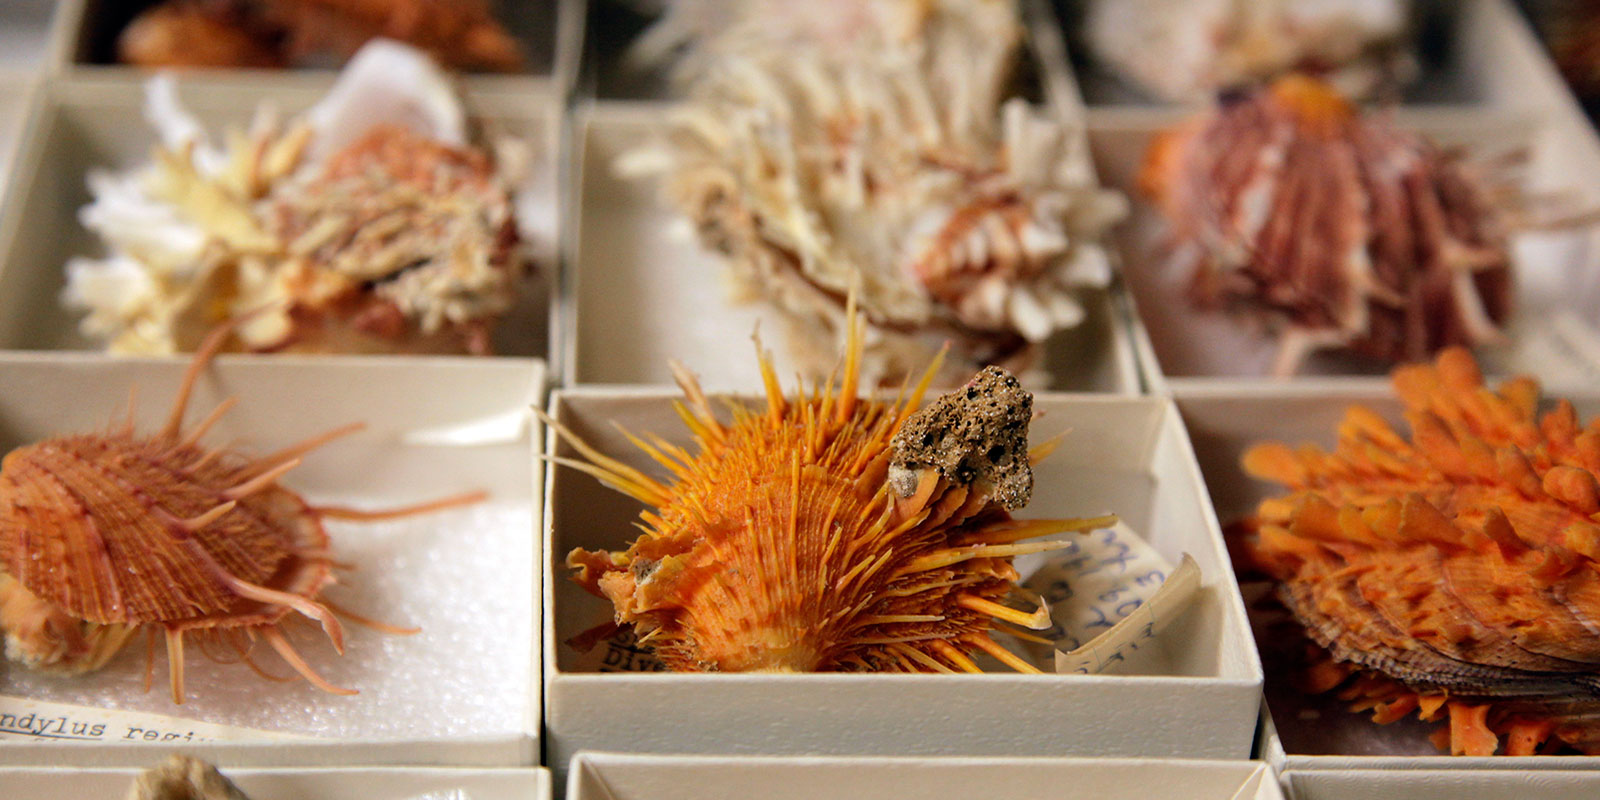 Orange and white carrier shells in the mollusc collection